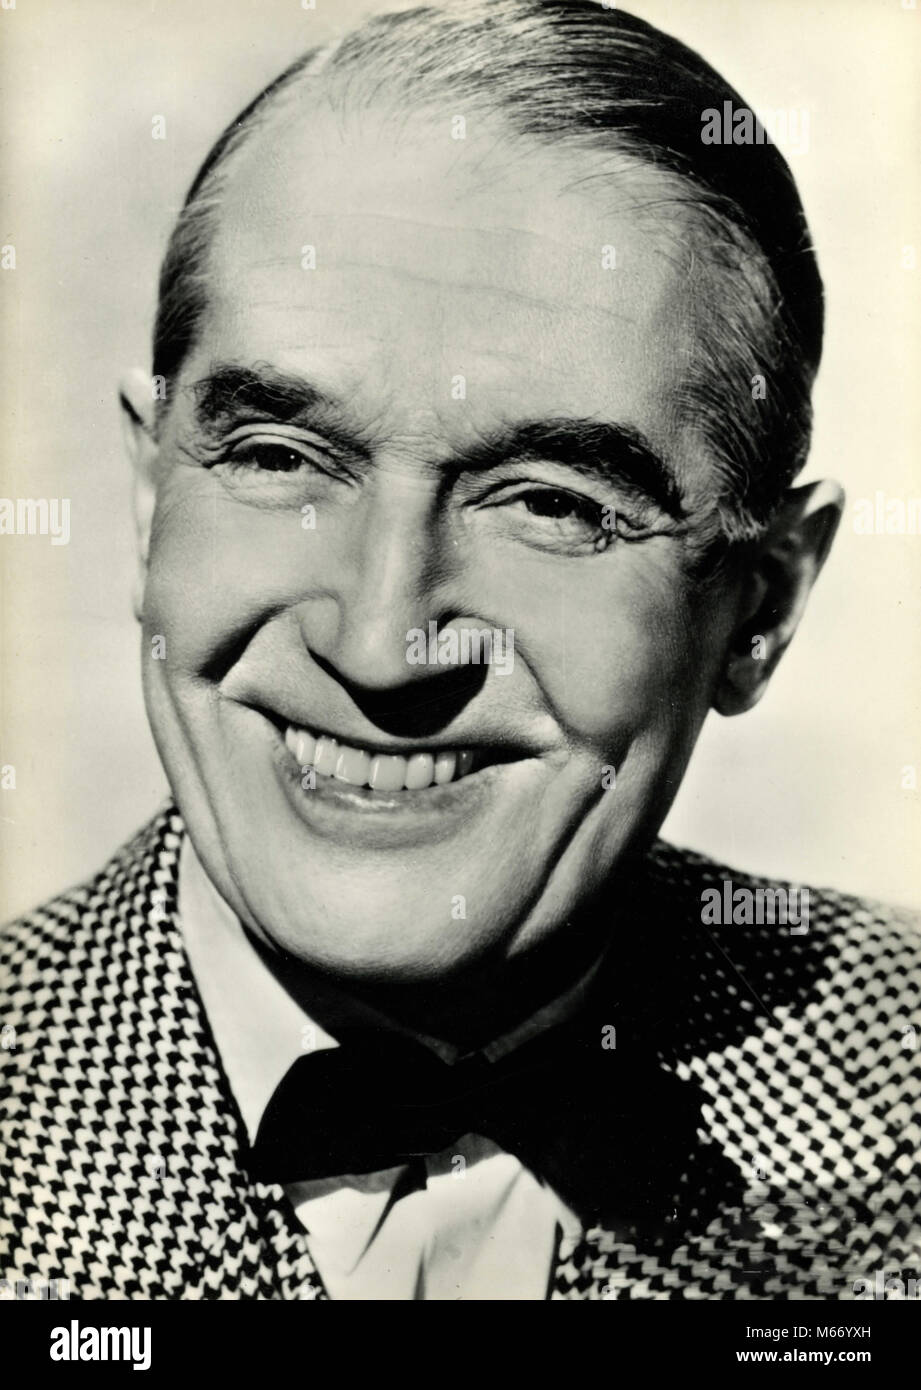 French actor and singer Maurice Chevalier, 1950s Stock Photo